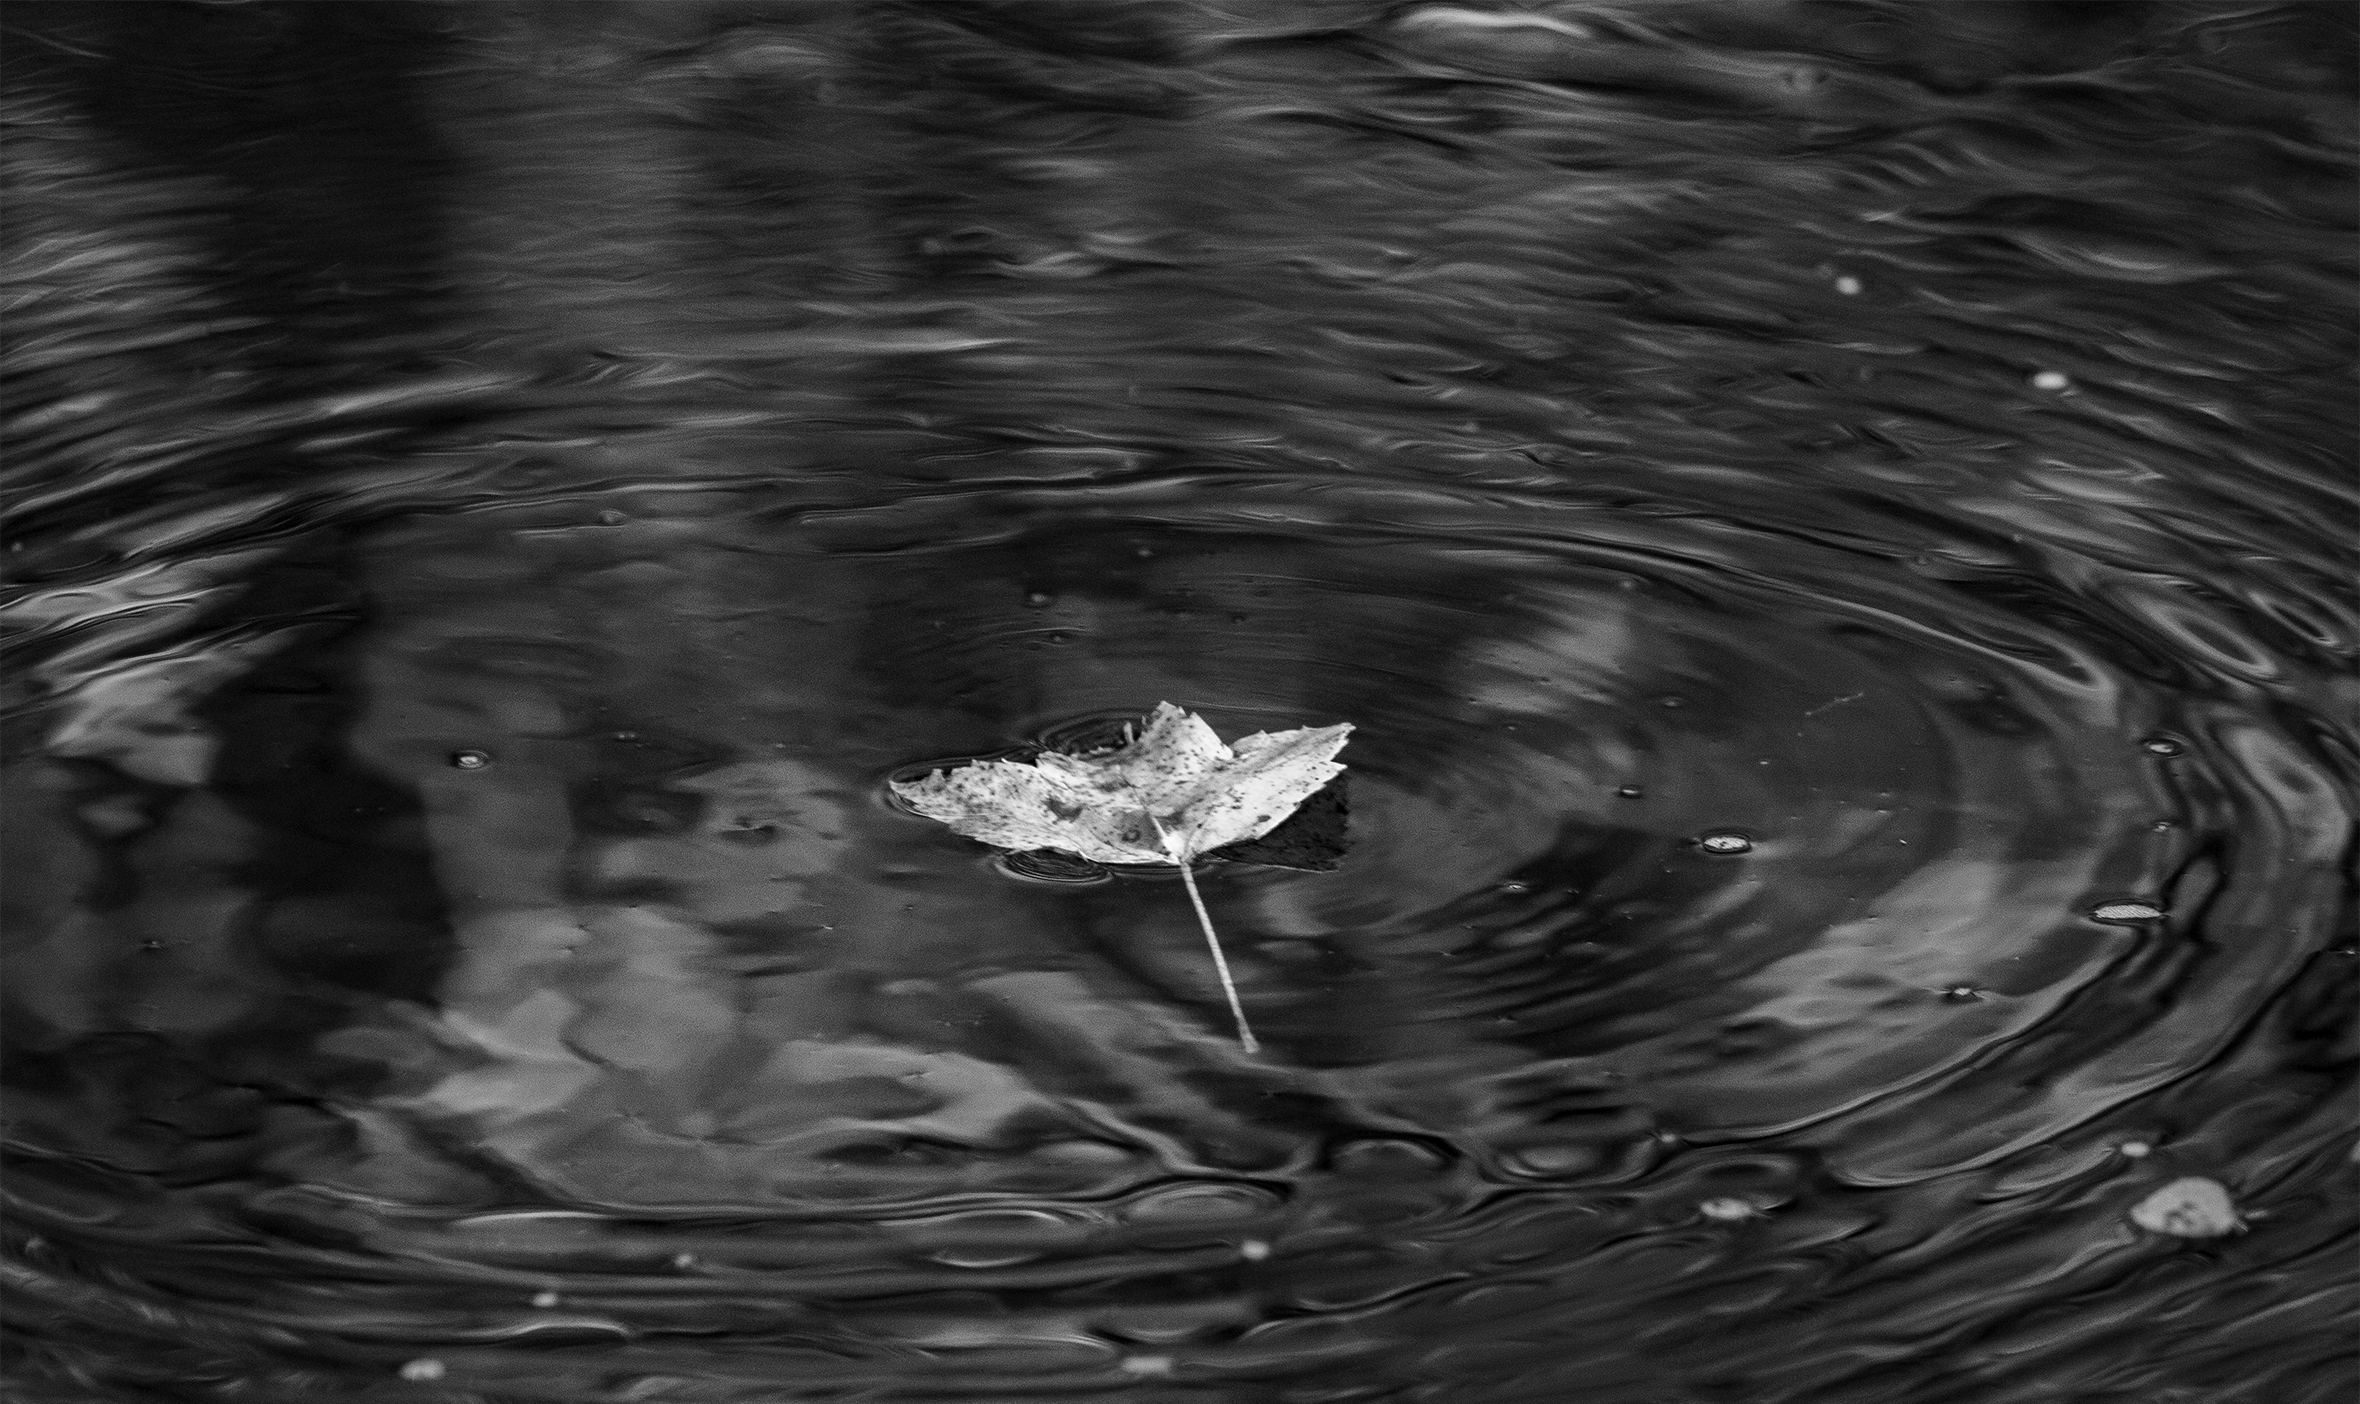 A leaf is floating in the center of gentle, circular ripples on a small body of water.